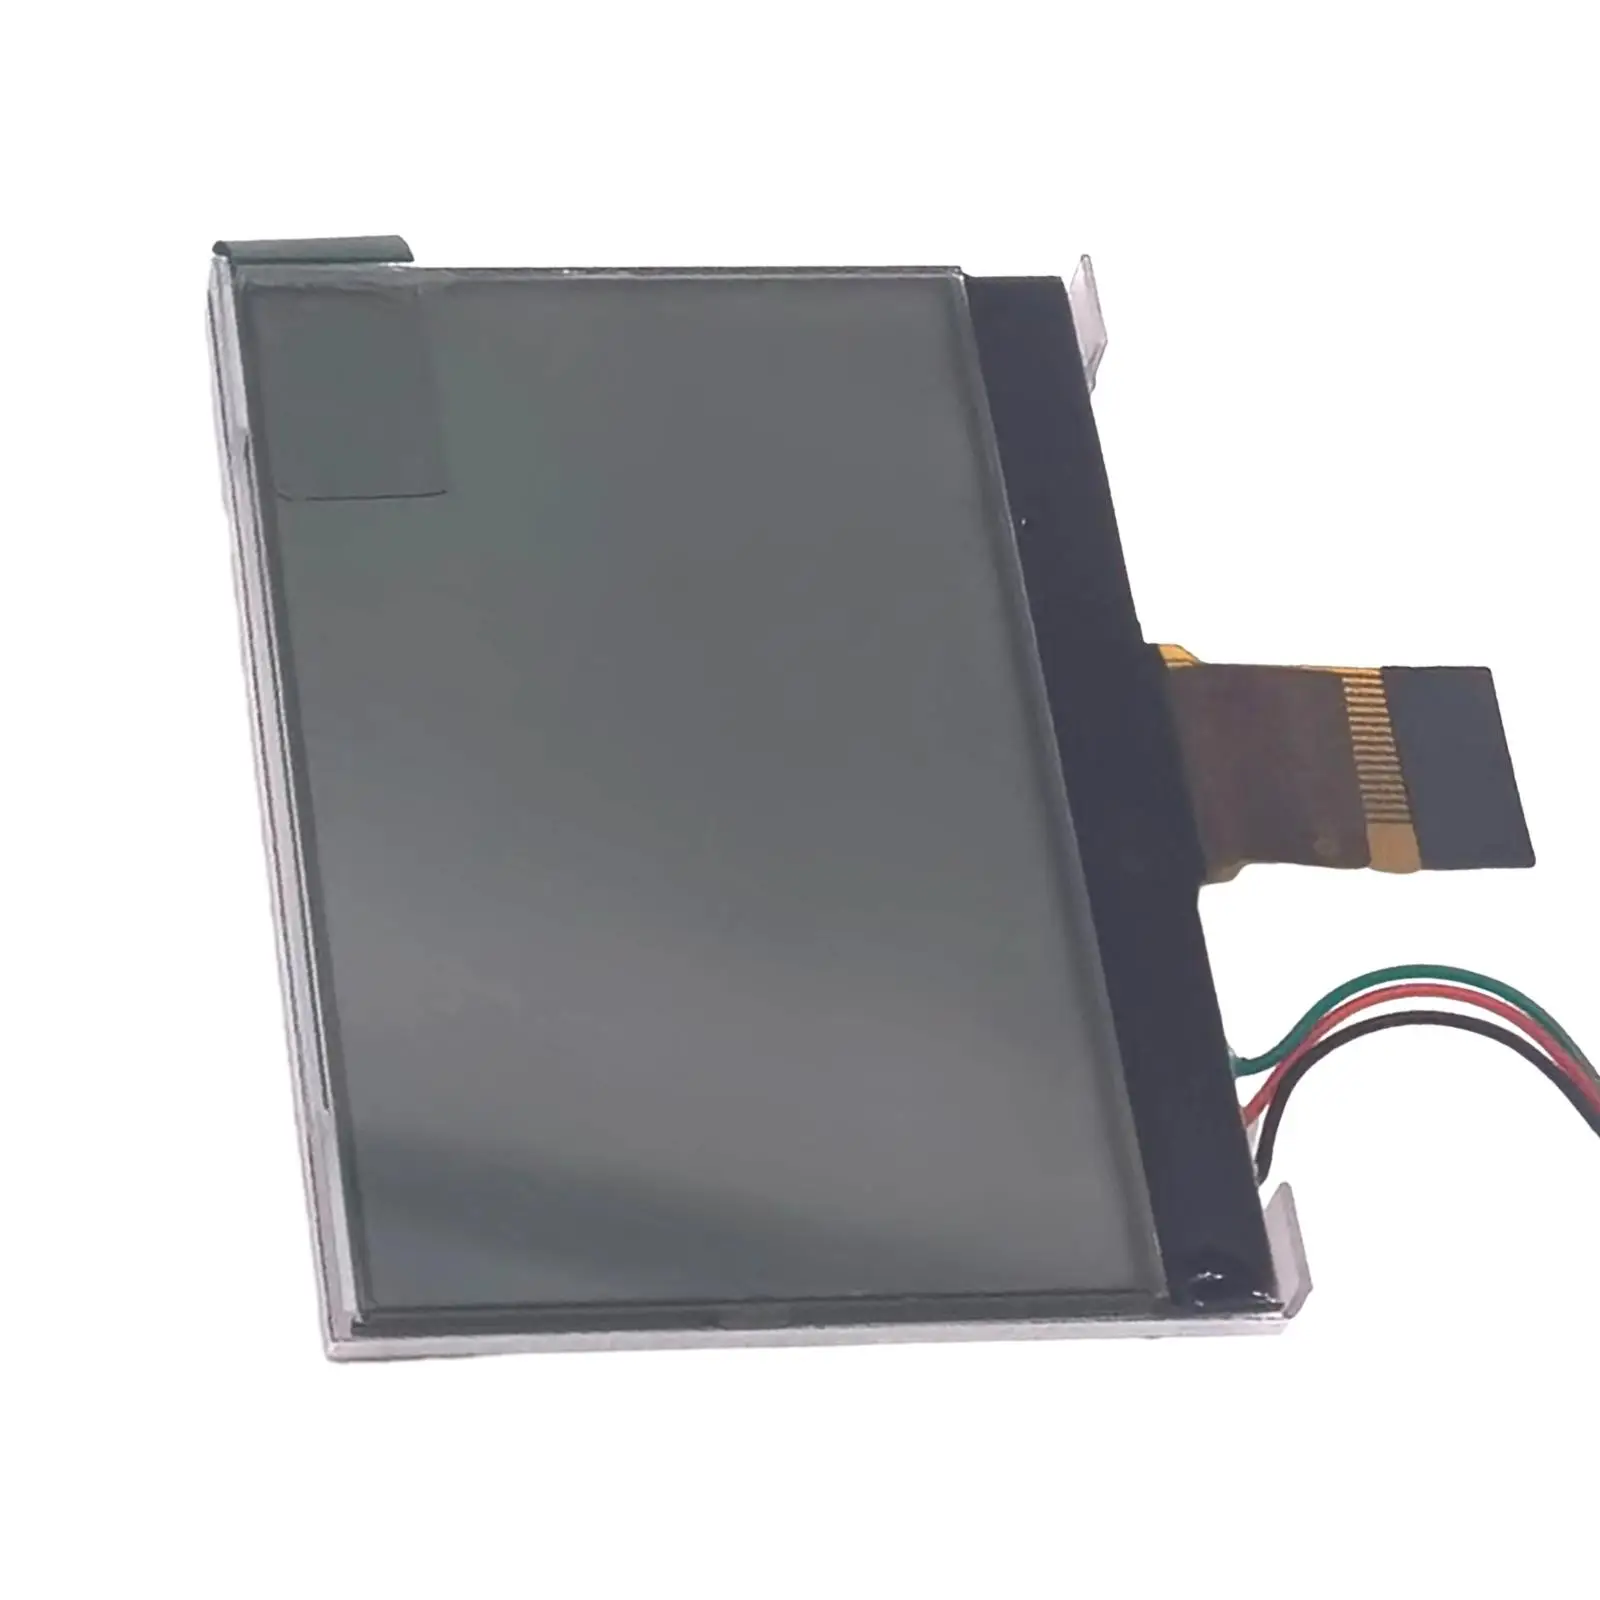 LCD Display Screen High Quality Glass Replacement Parts Durable Professional for V1 V860III Flash Repair Part Components